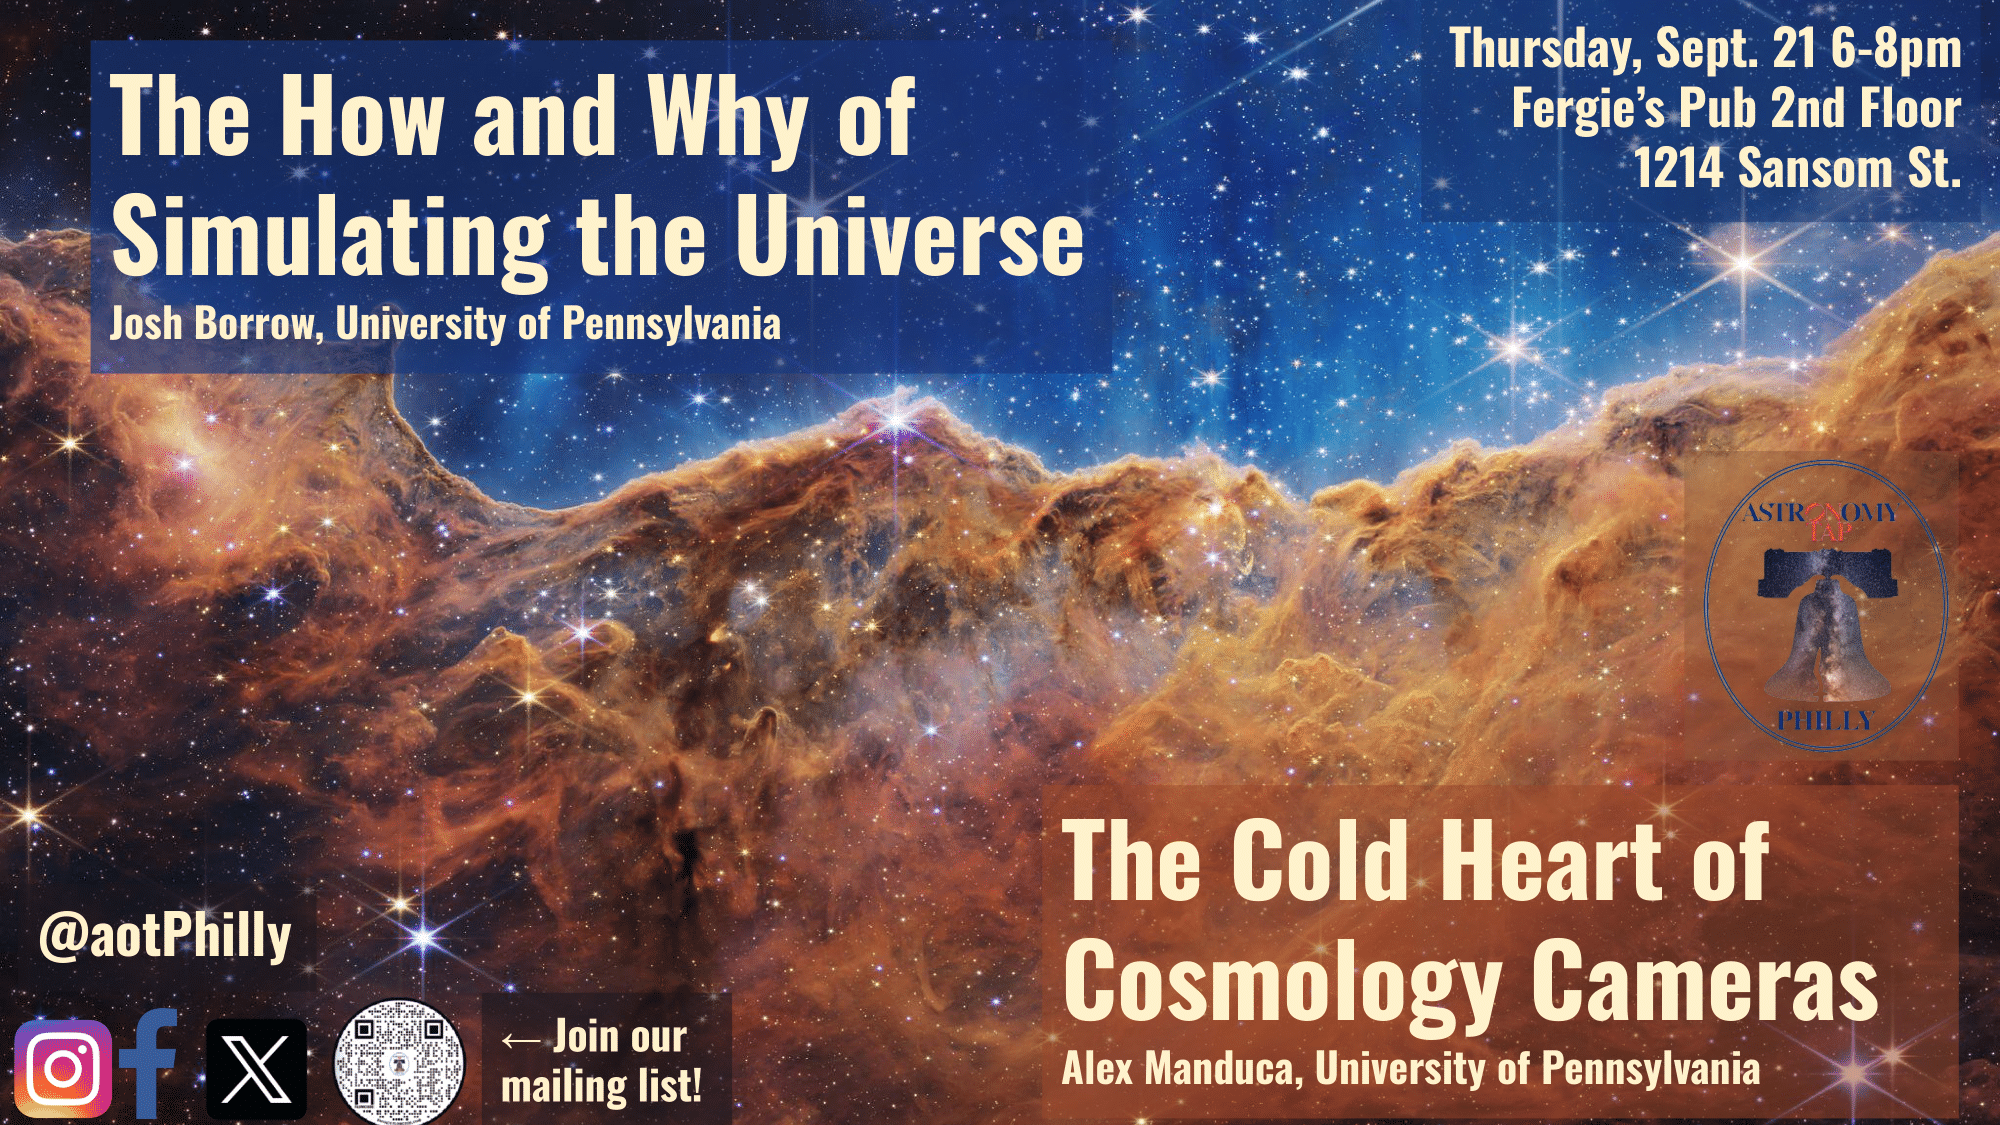 Flyer with details about Astro on Tap Philly. Background image is the "Cosmic Cliffs" image from JWST of the Carina Nebula. In the top left corner, large yellow font says: "The How and Why of Simulating our Universe, Josh Borrow, UPenn." In the bottom right, the same large yellow font says "The Cold Heart of Cosmology Cameras, Alex Manduca, UPenn." The top right has smaller yellow font that gives the time, date, and location of our event. It says "Thurs Sept 21 6-8 pm, Fergie's Pub 2nd floor, 1214 Sansom Street." In the bottom left corner of the flyer, it has the logos of all of the most famous social media sites (Twitter/X, Instagram, and FaceBook) with our social media handle, @aotPhilly so people can follow us on social media. There is also a QR code where people can sign up for our email list.